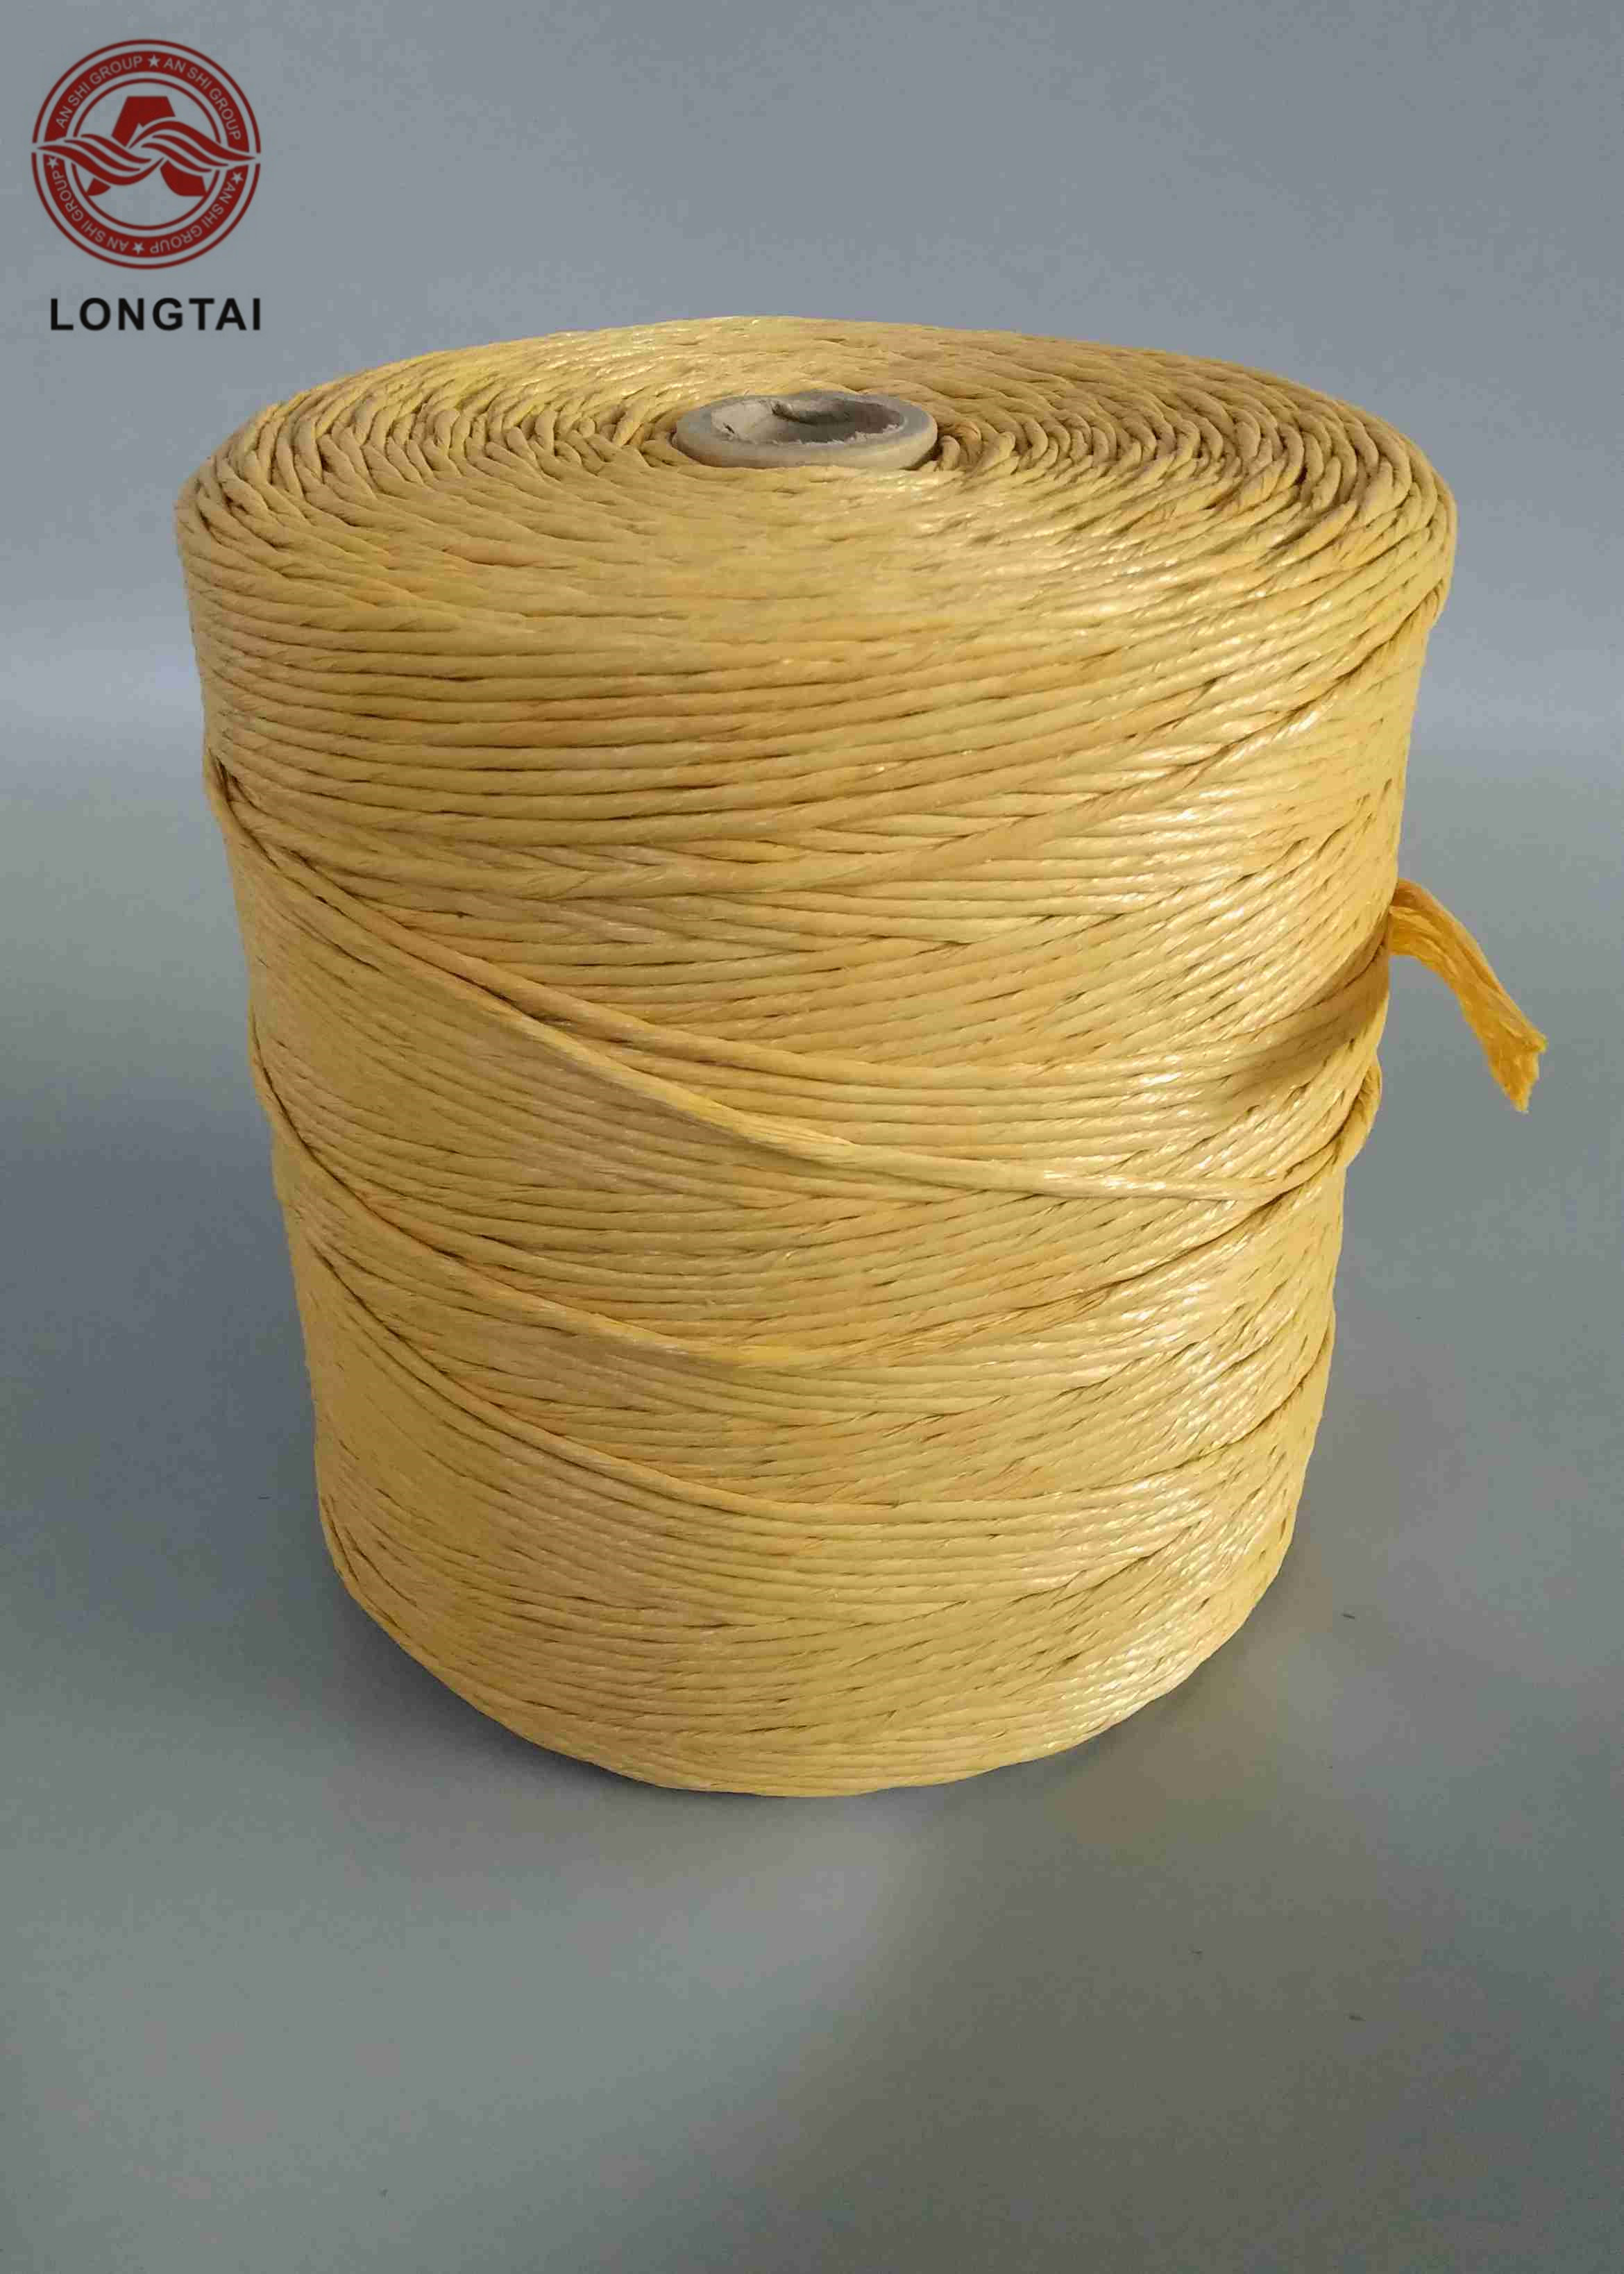 Cheap Yellow Color PP Cable Filler Material Yarn Per Meter 33-36 Twisted Environmentally Friendly wholesale